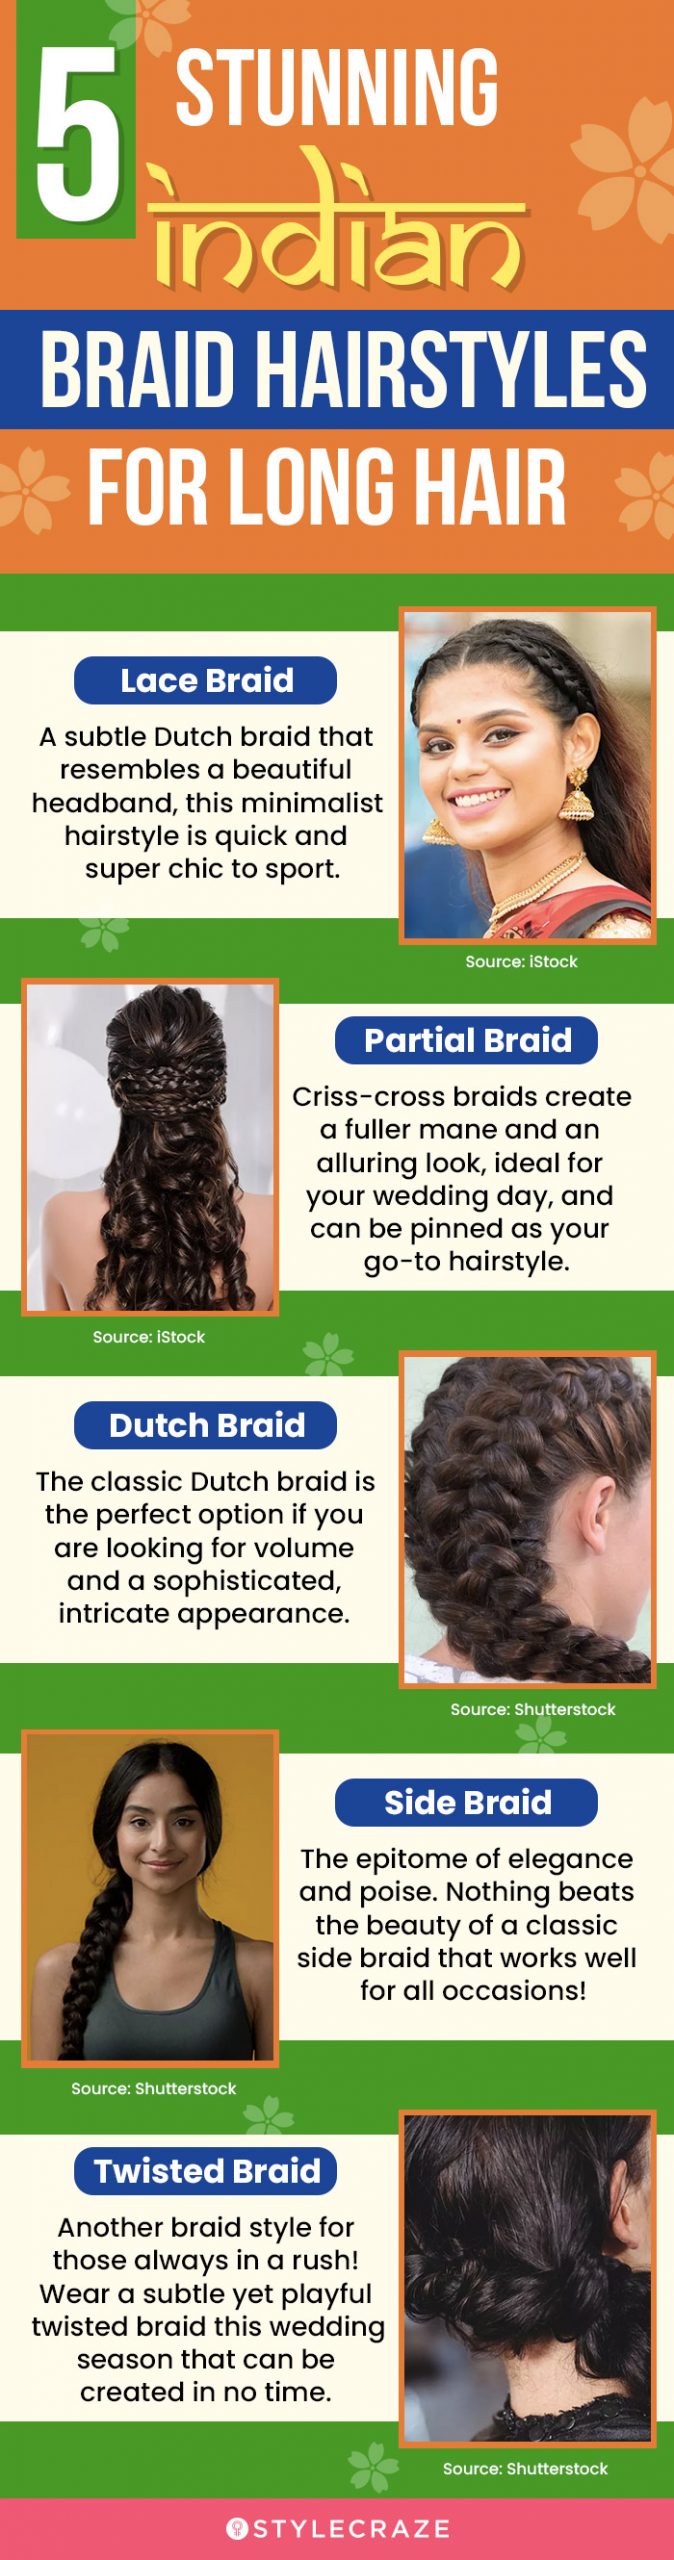 5 stunning indian braid hairstyles for long hair (infographic)